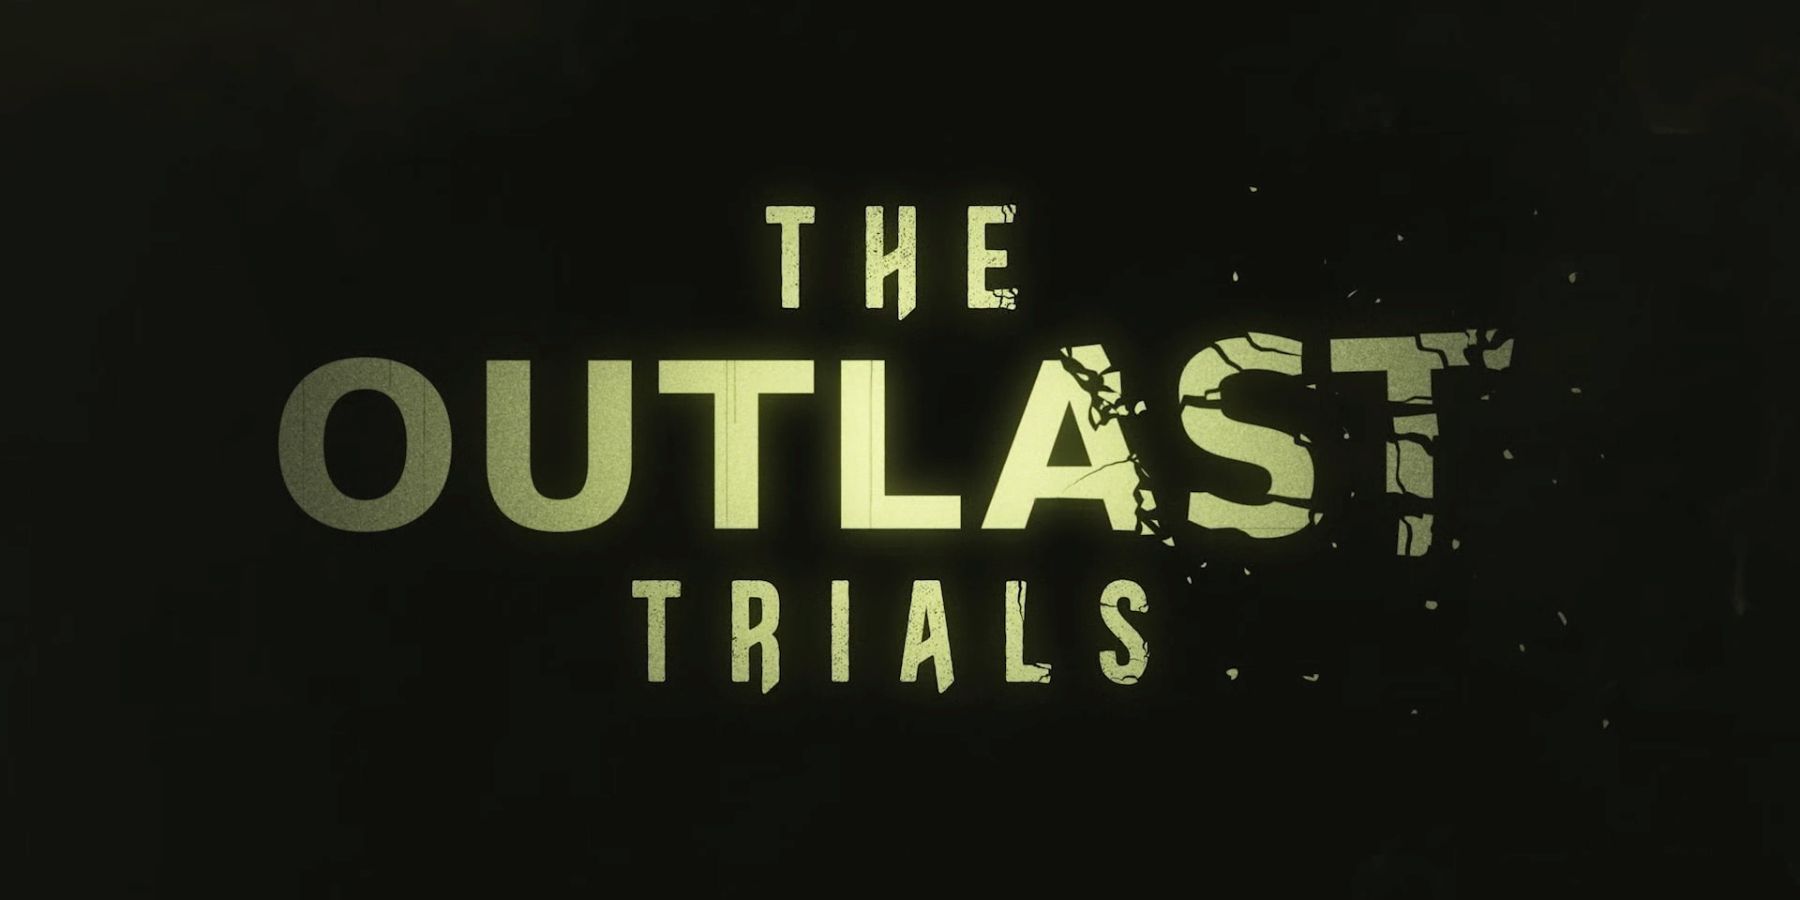 COOP NO THE OUTLAST TRIALS